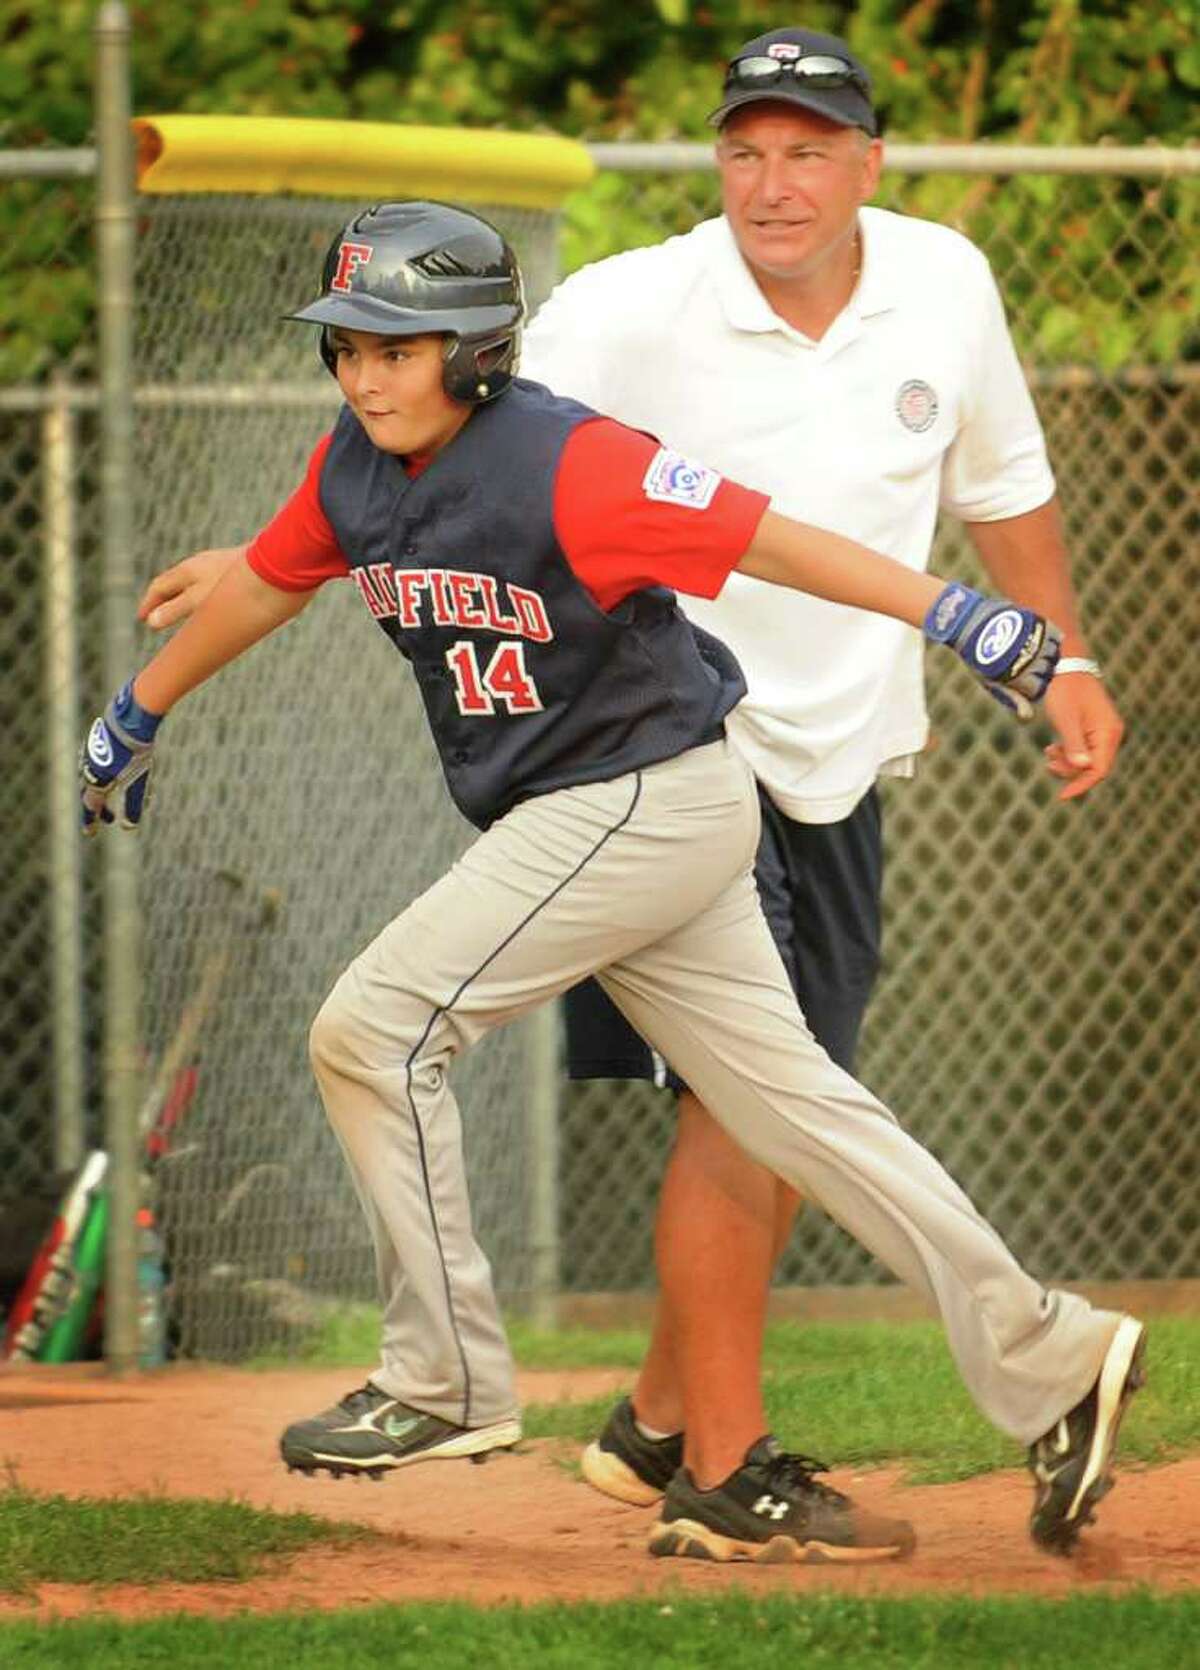 Fairfield National's Zavier Espina rounds third base after hitting a three run home run in the sixth inning of their Little League matchup with Trumbull American at Blackham School in Bridgeport on Monday, July 11, 2011. Fairfield National won the game 4-3.